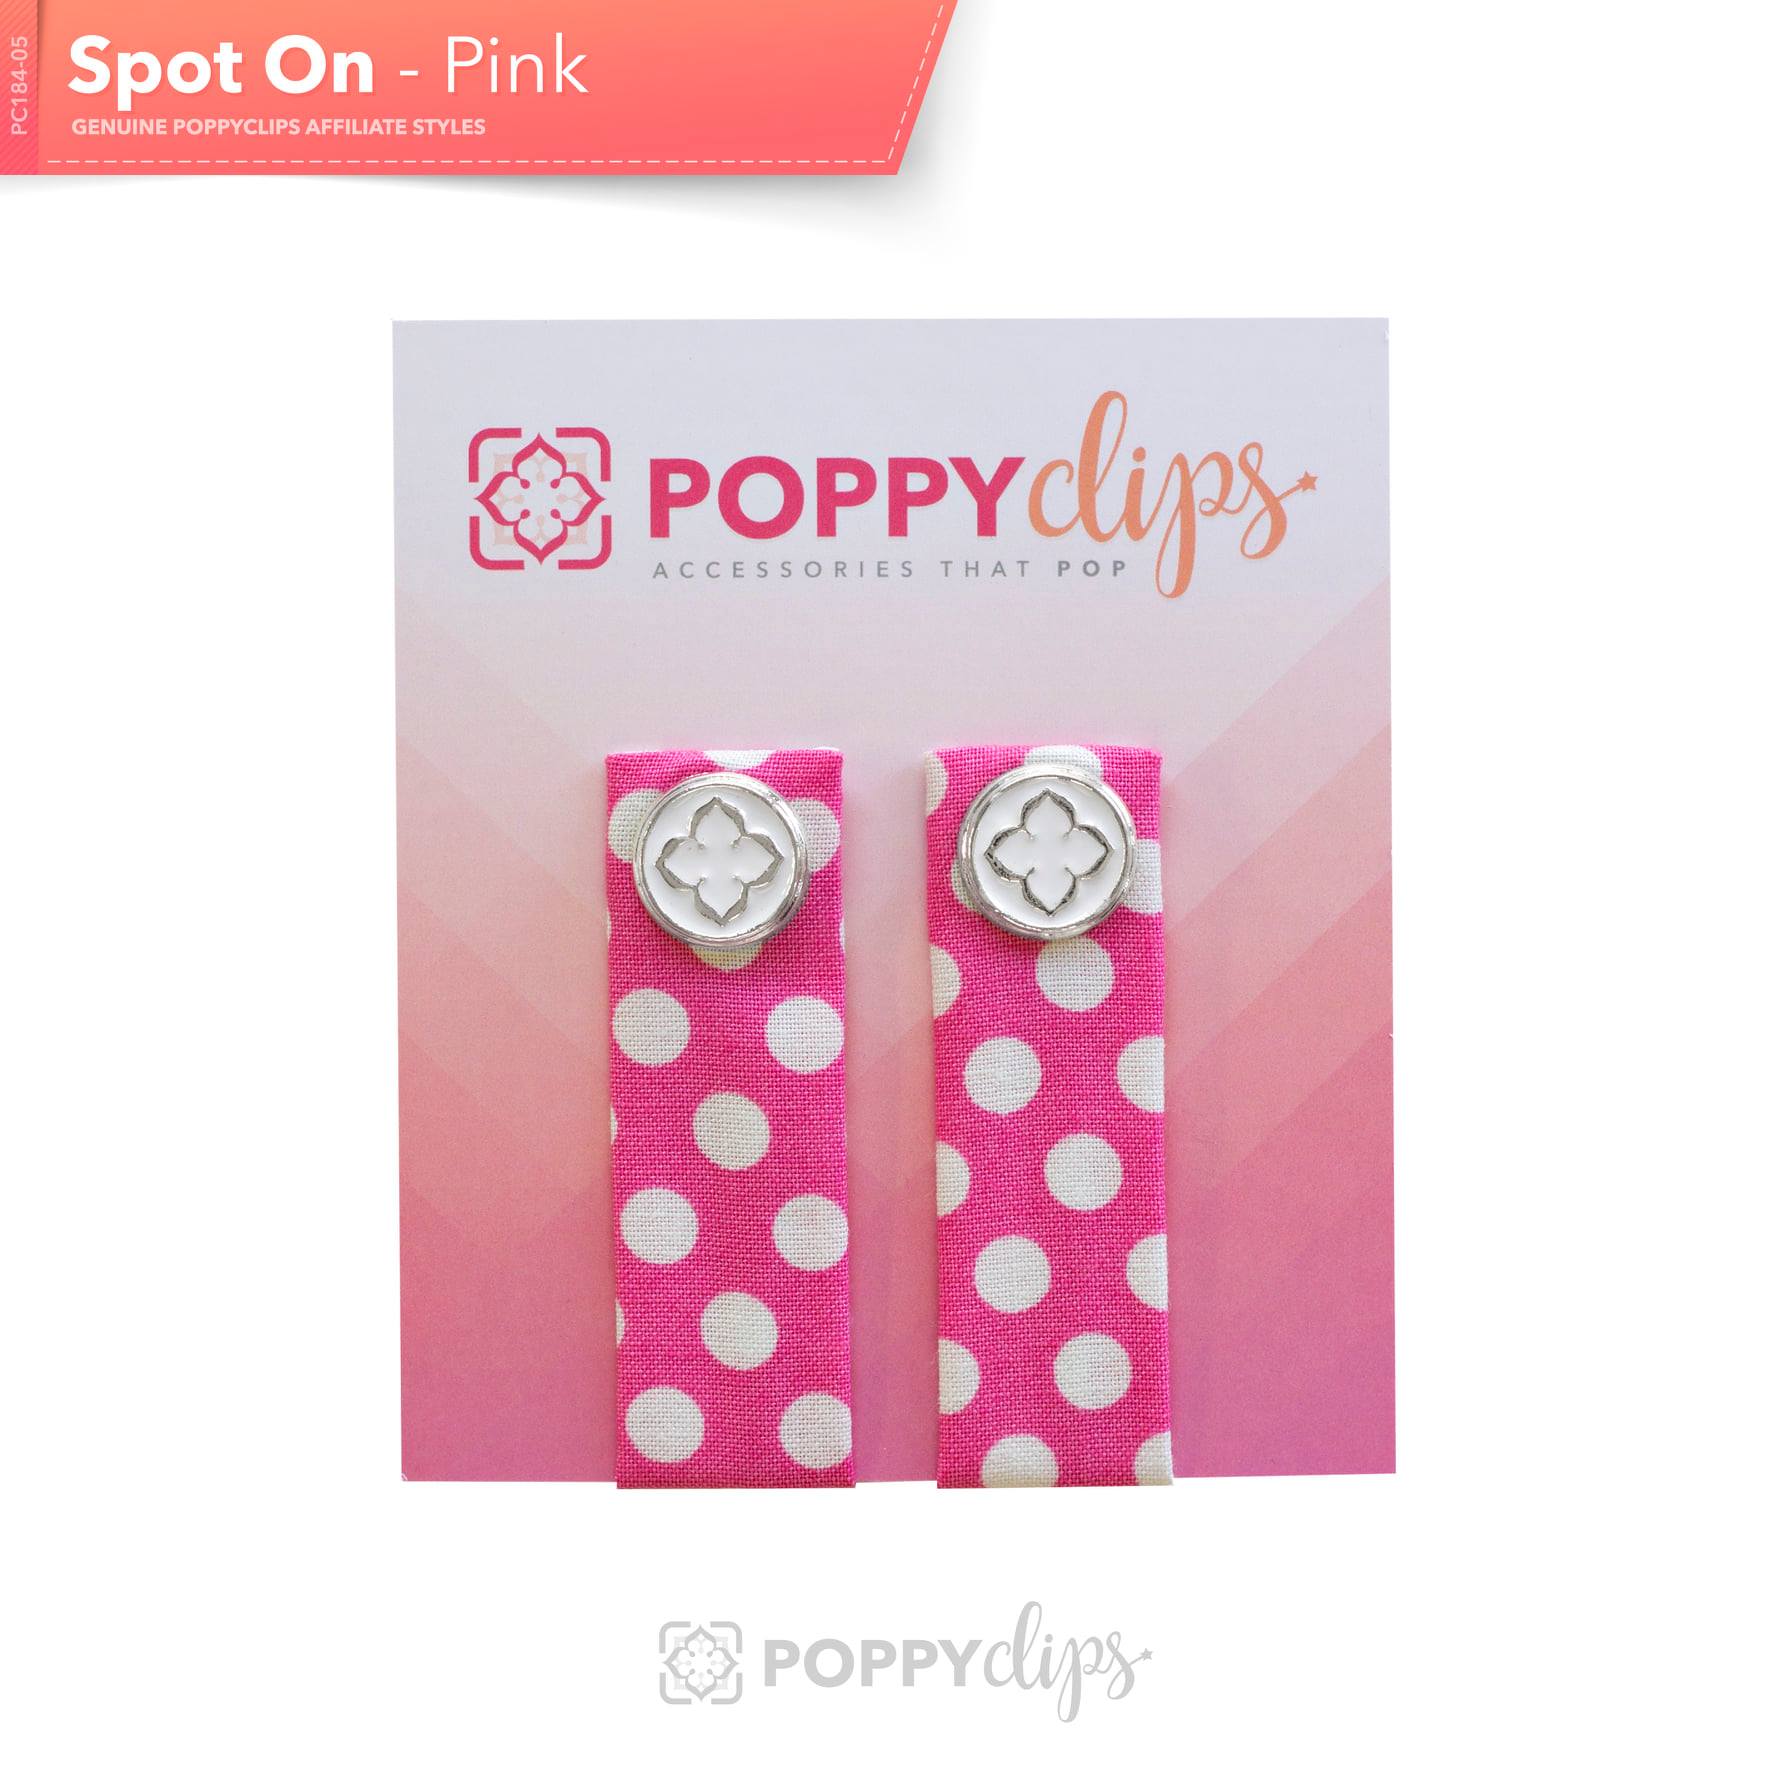 Two 5 ¼” long by 7/8” wide bright pink material with white polka dots, and a magnet at each end.  The outer magnet is a decorative silver medallion with the company logo. 